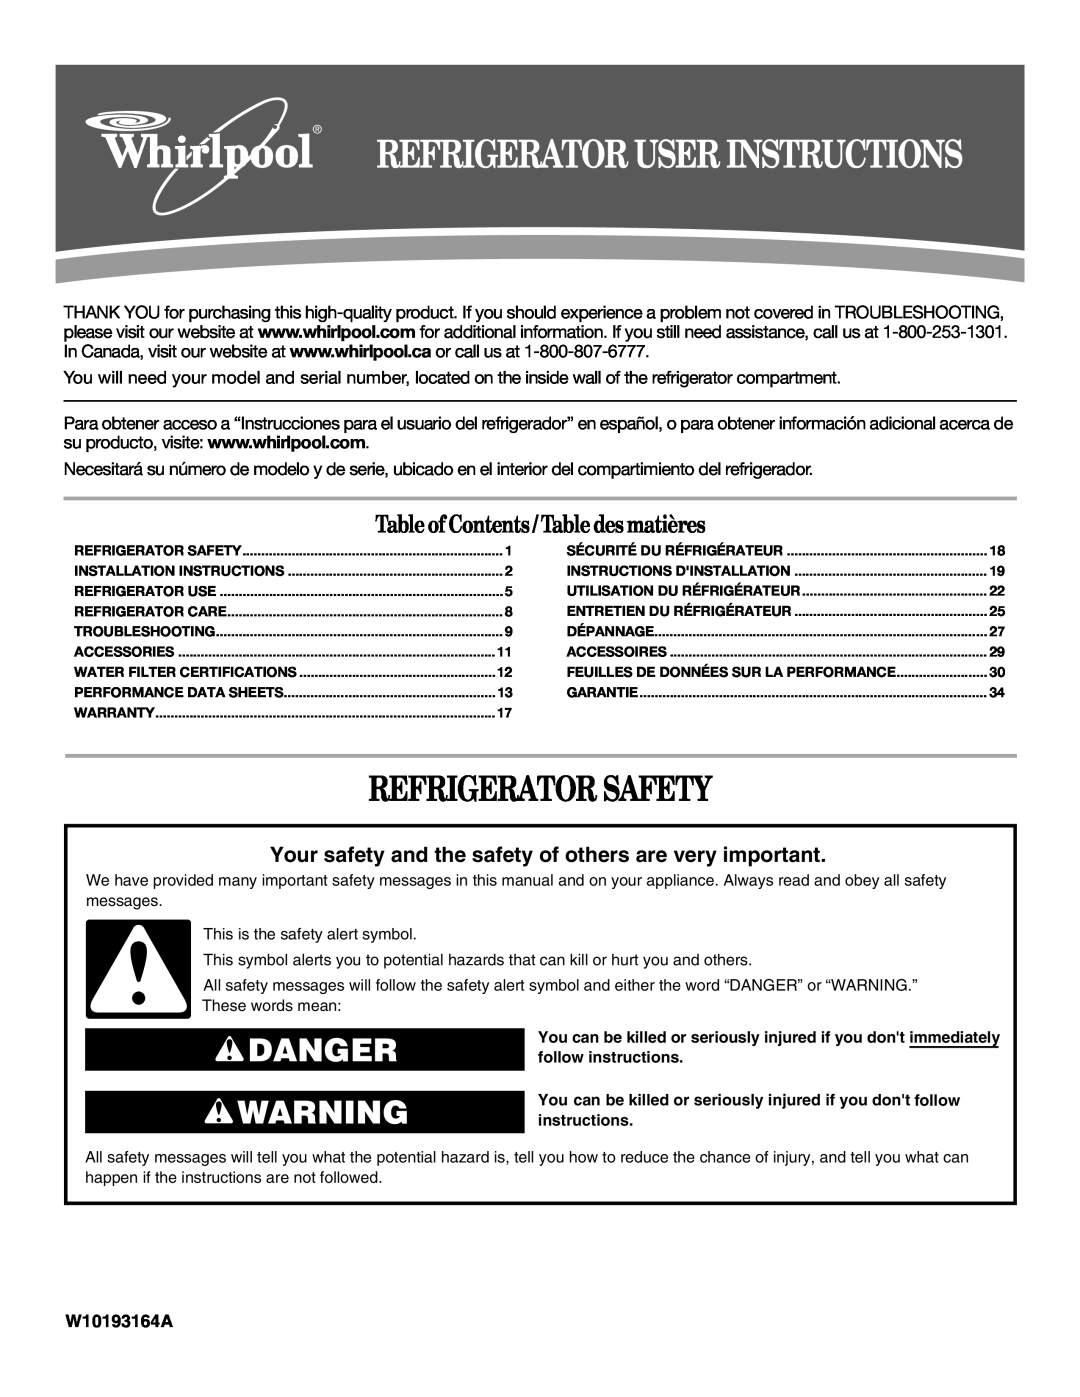 Whirlpool W10193164A installation instructions Refrigerator Safety, Danger, Table of Contents / Table des matières 